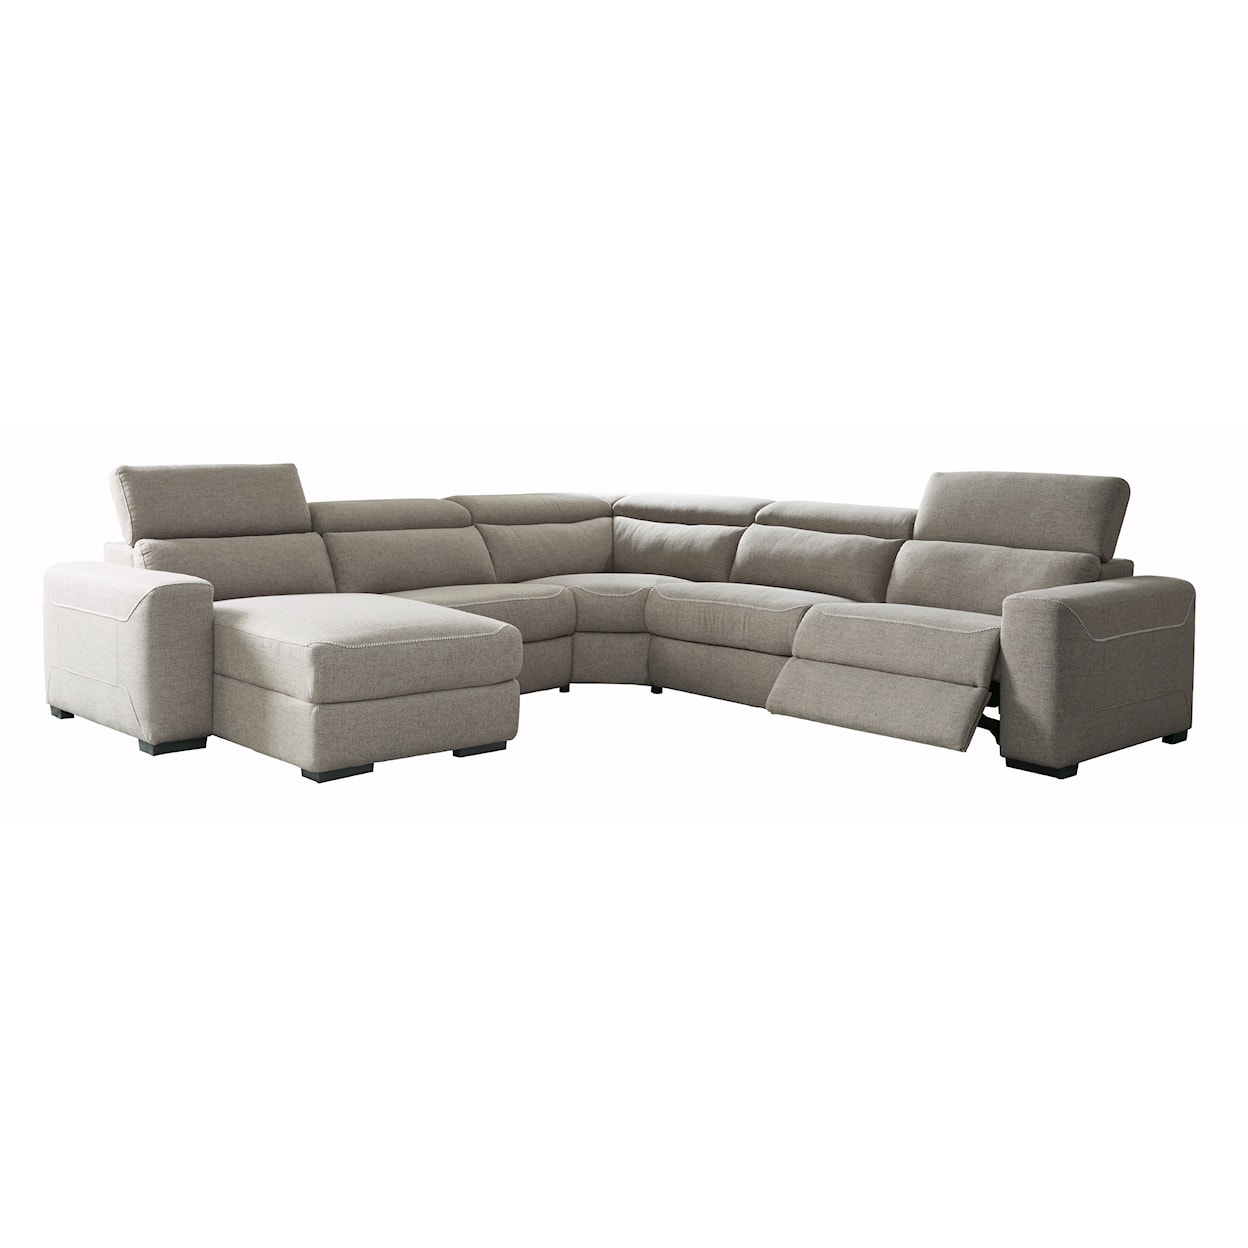 Signature Design by Ashley Mabton 5-Piece Power Sectional